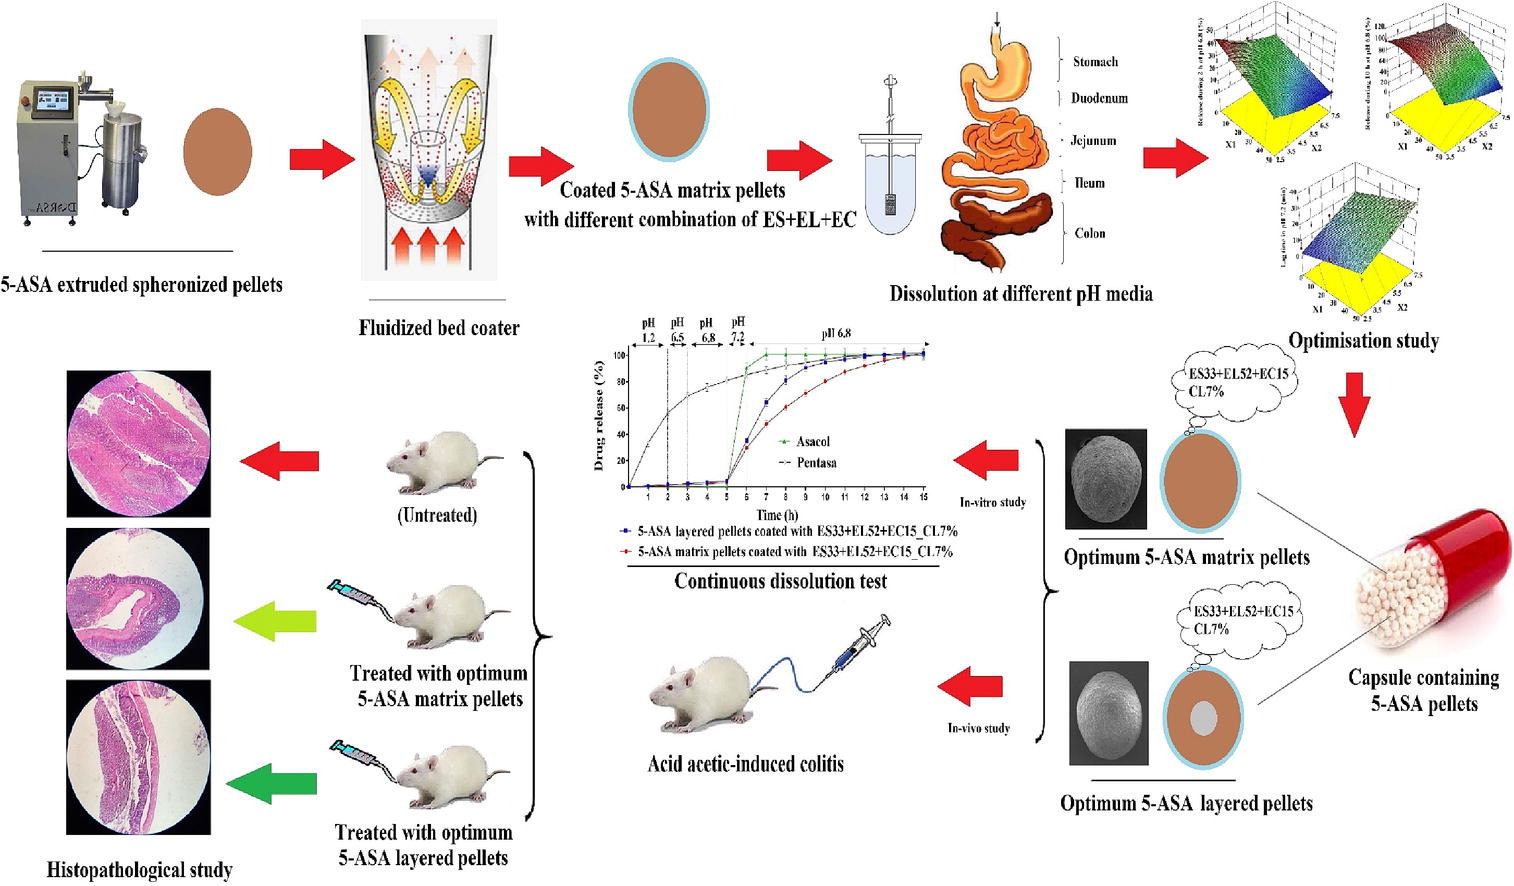 Comparison of 5-ASA layered or matrix pellets coated with a combination of ethylcellulose and Eudragits L and S in the treatment of ulcerative colitis in rats